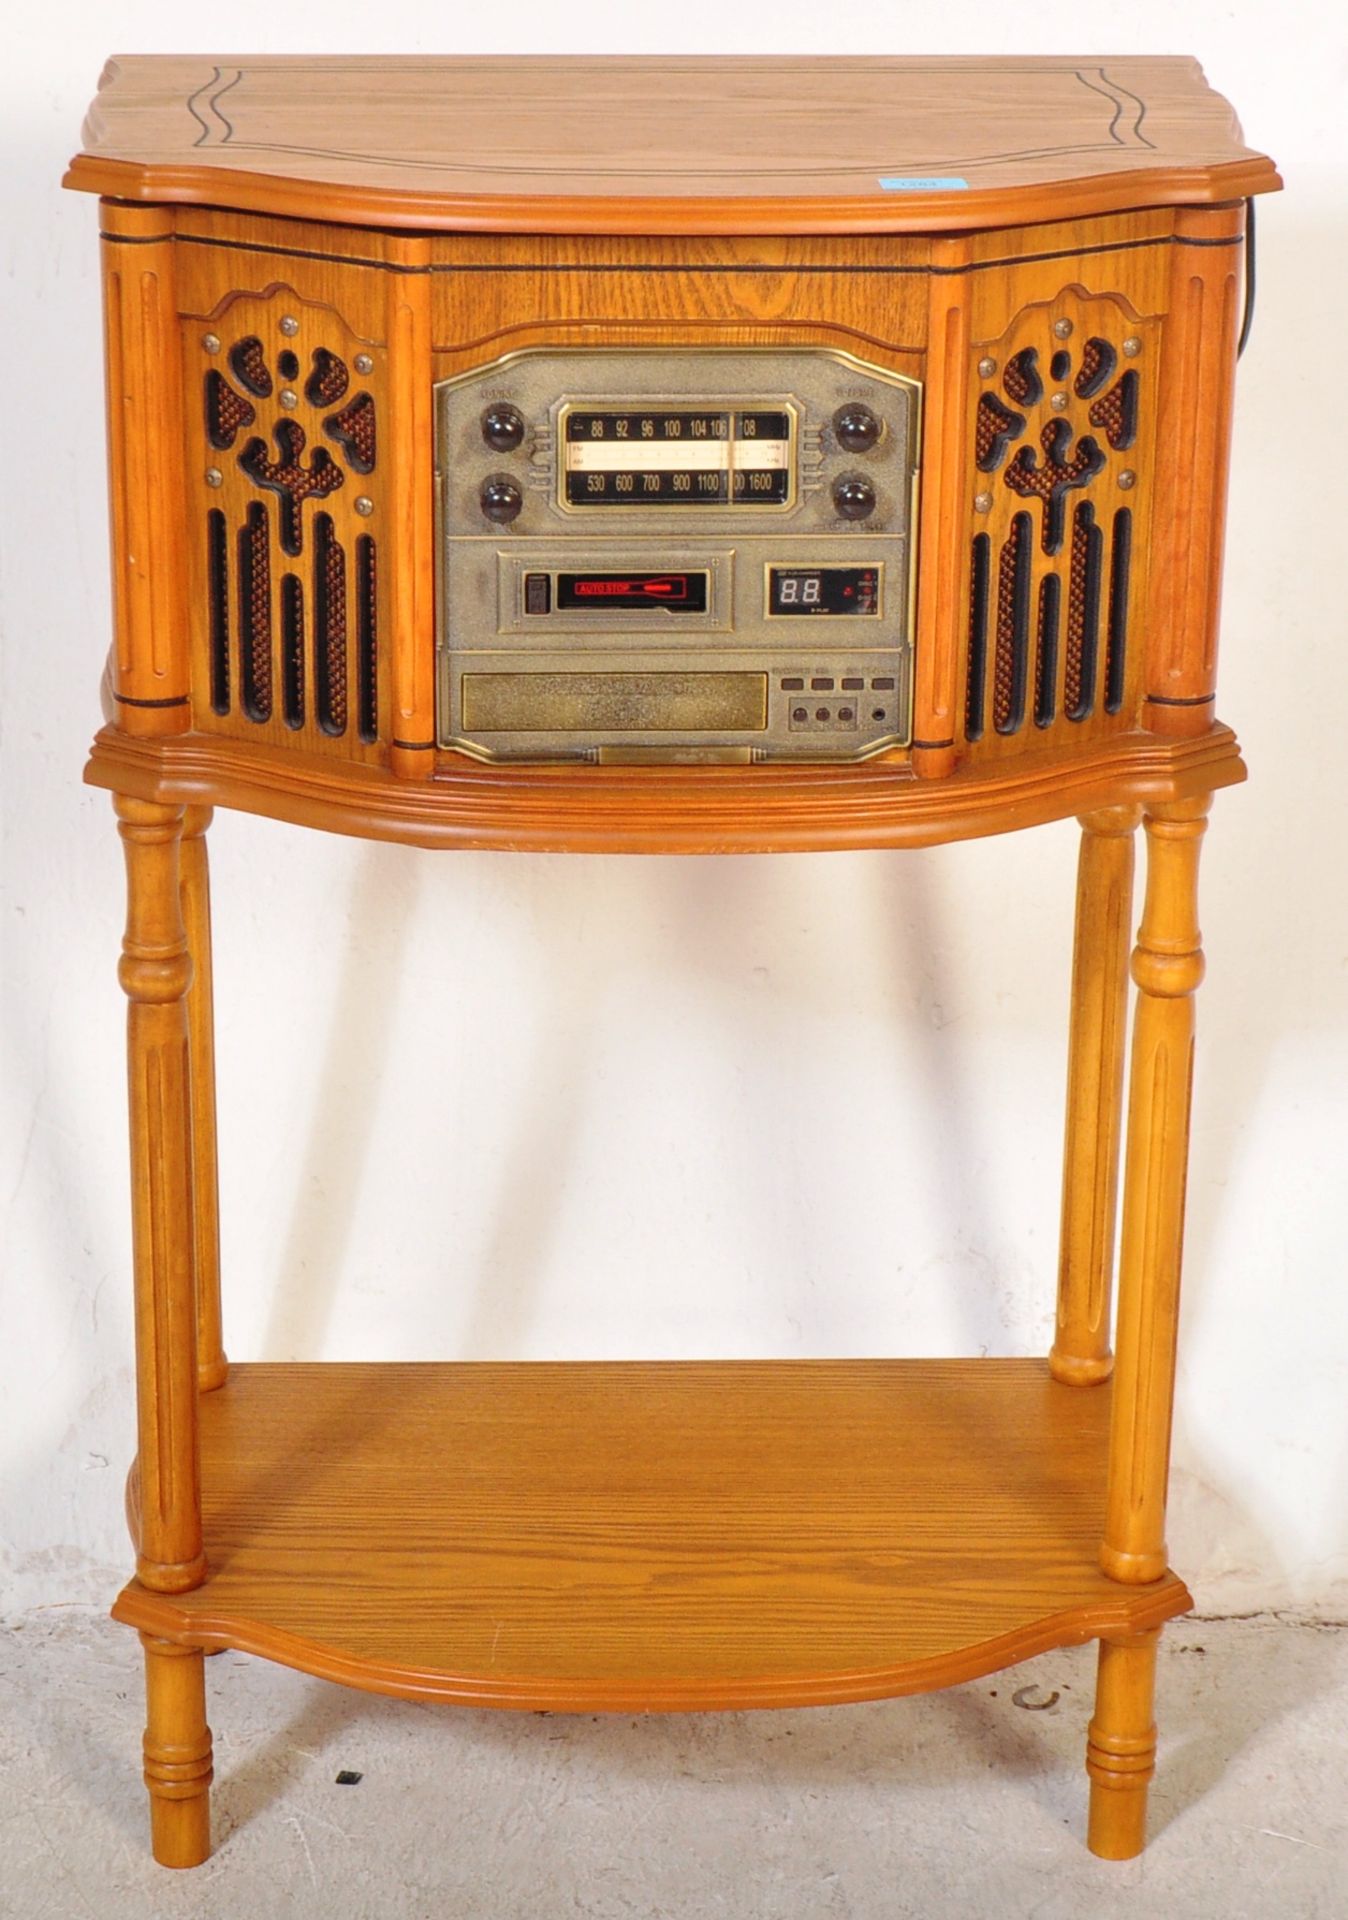 VINTAGE CANTERBURY CASSETTE / CD PLAYER / RADIO PHONOGRAPH - Image 2 of 6